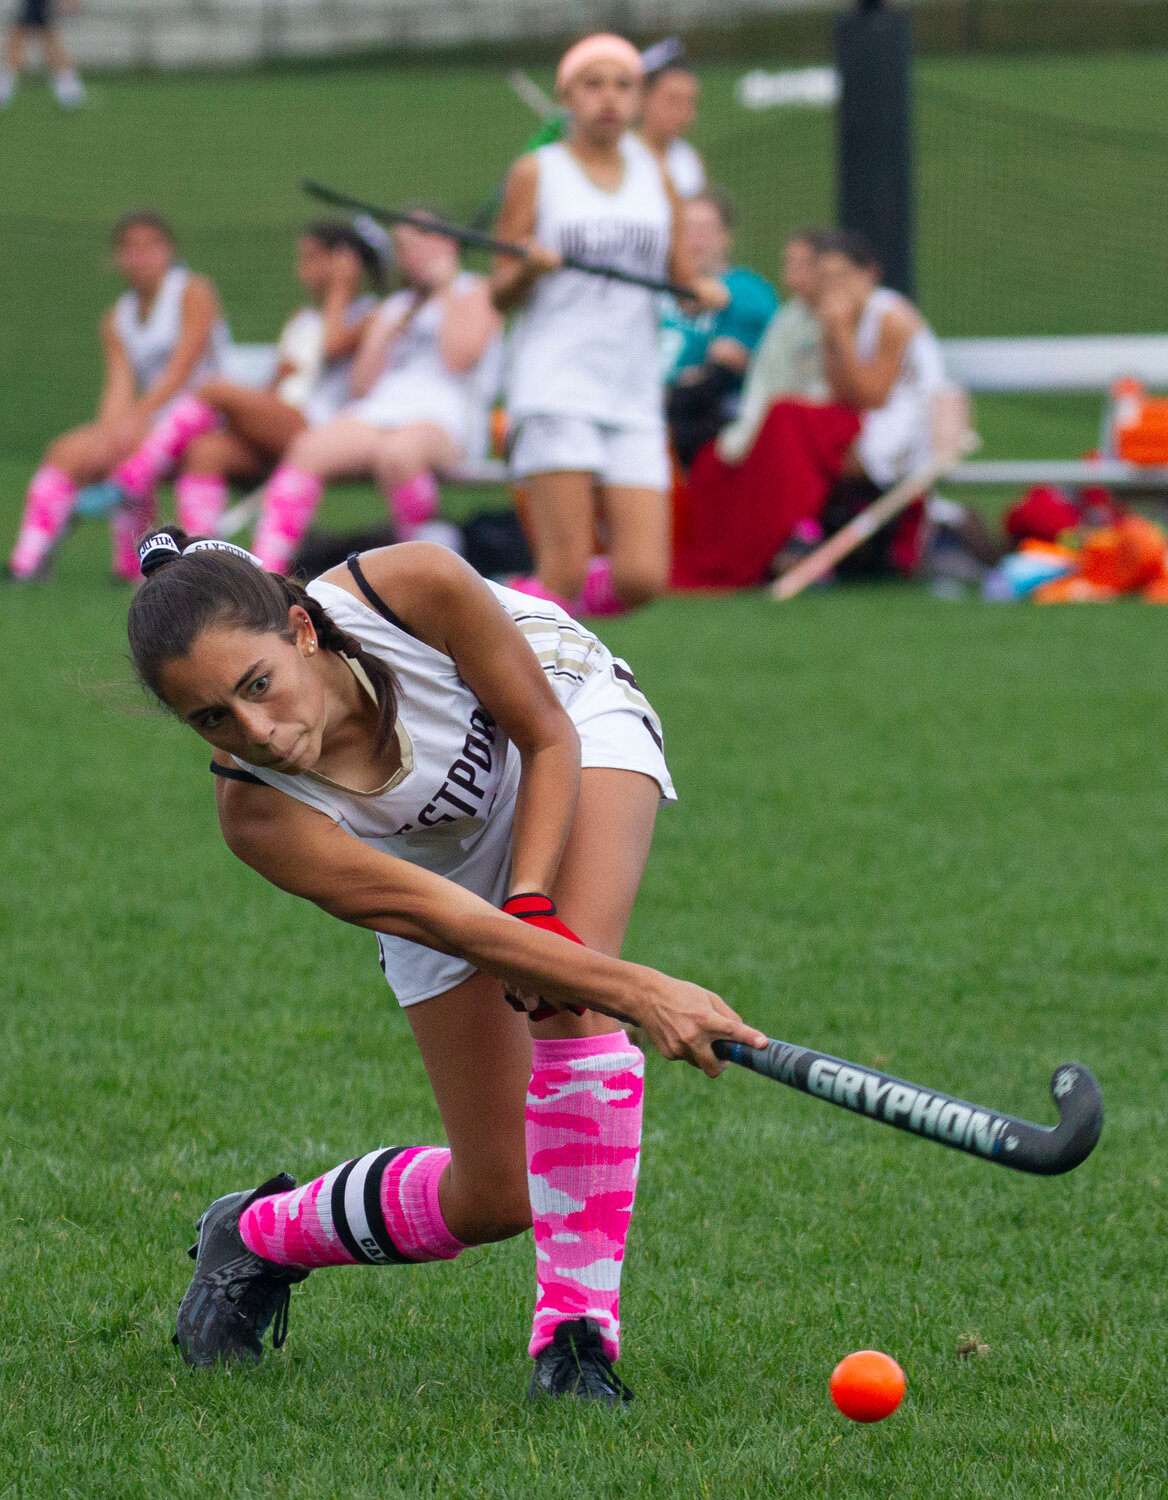 Senior forward Avery Avila played her final field hockey game for the Wildcats in their 1-0 playoff loss to Frontier Regional on Friday.